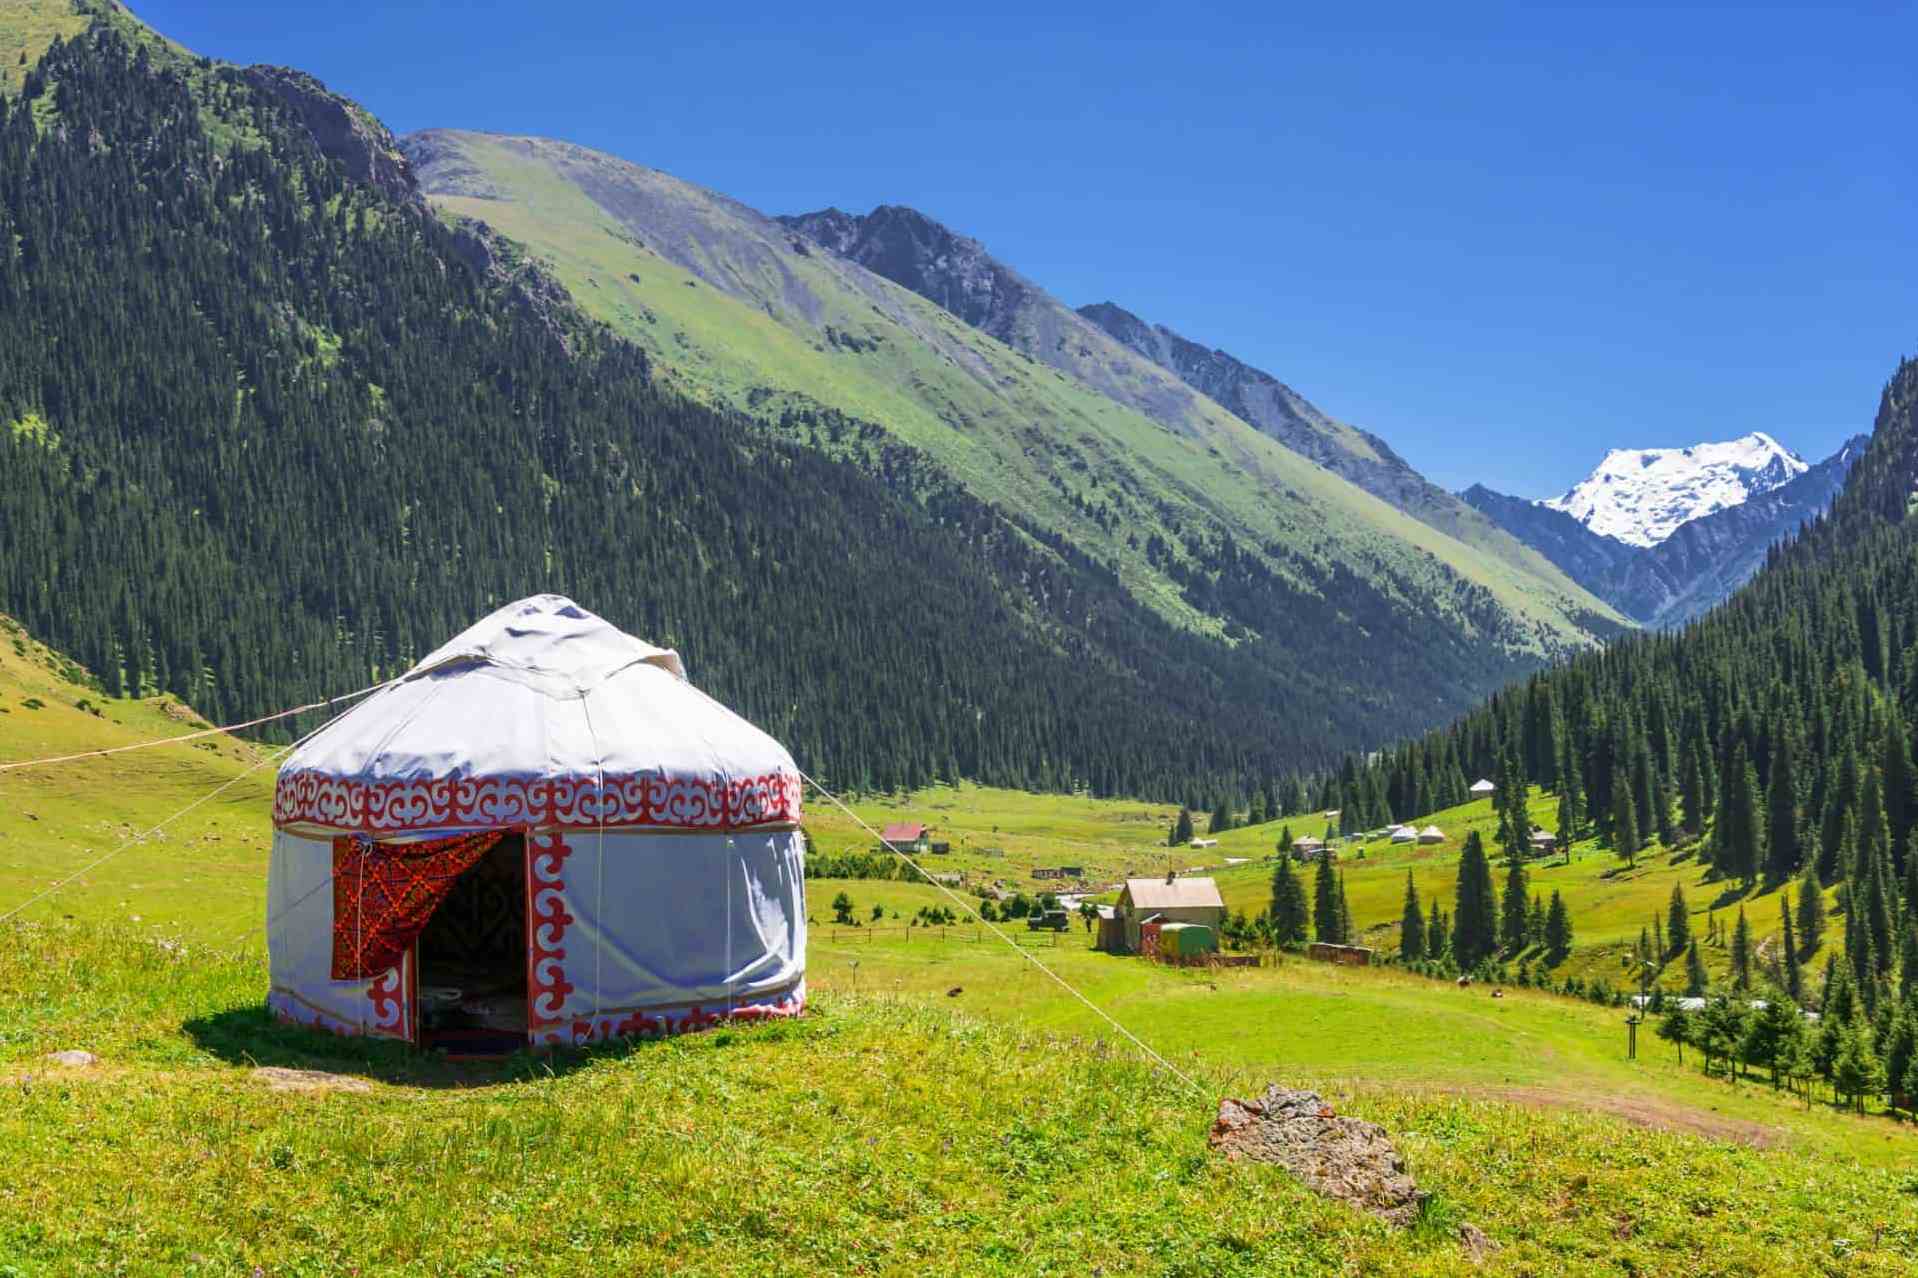 A-yurt-in-the-mountains-of-Kyrgyzstan.jpg